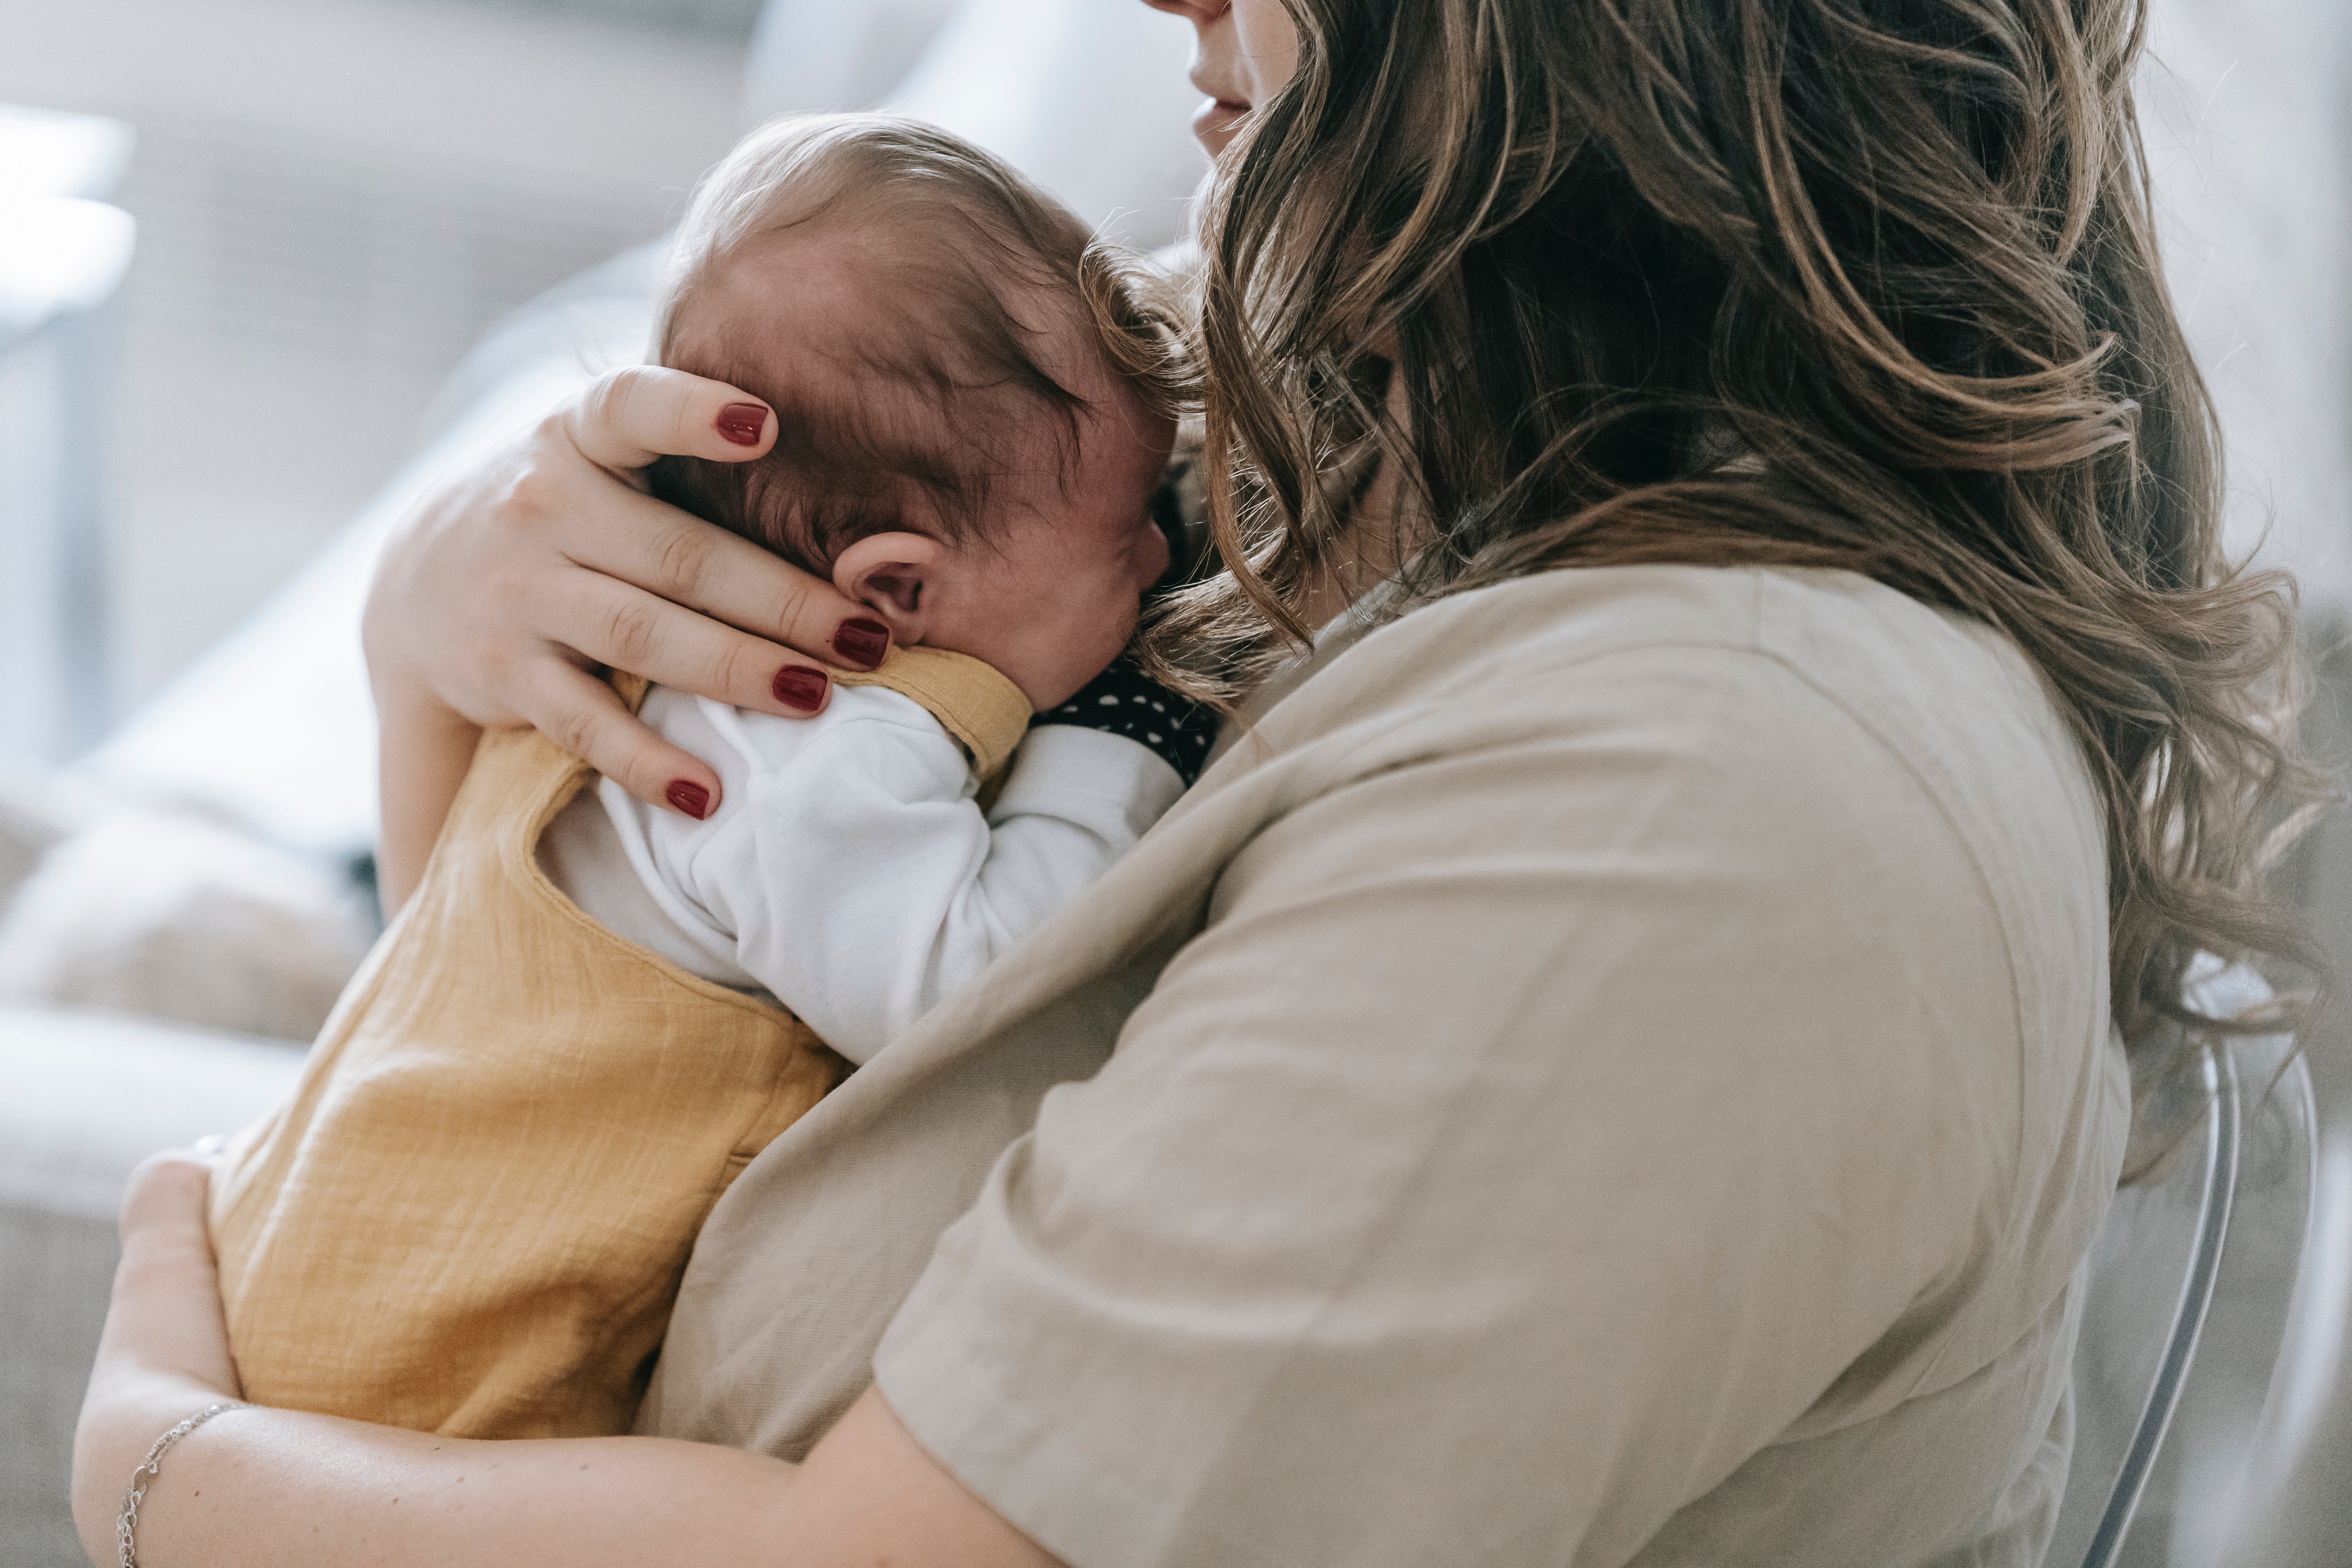 A woman holding her baby close. | Source: Pexels